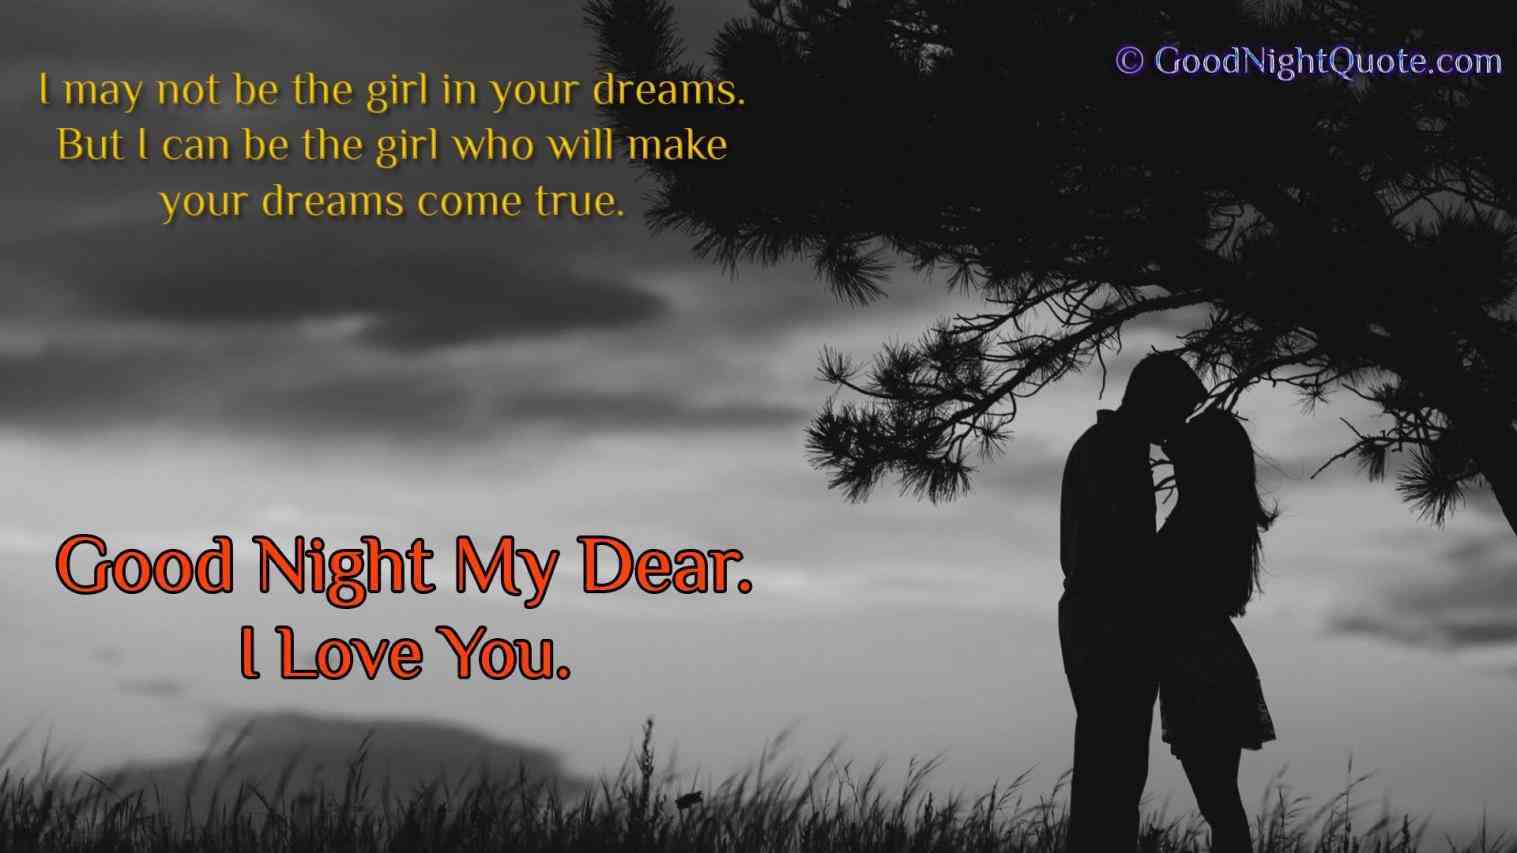 Romantic Couple Images With Quotesrhchobirdokancom - Qoutes And Notes , HD Wallpaper & Backgrounds